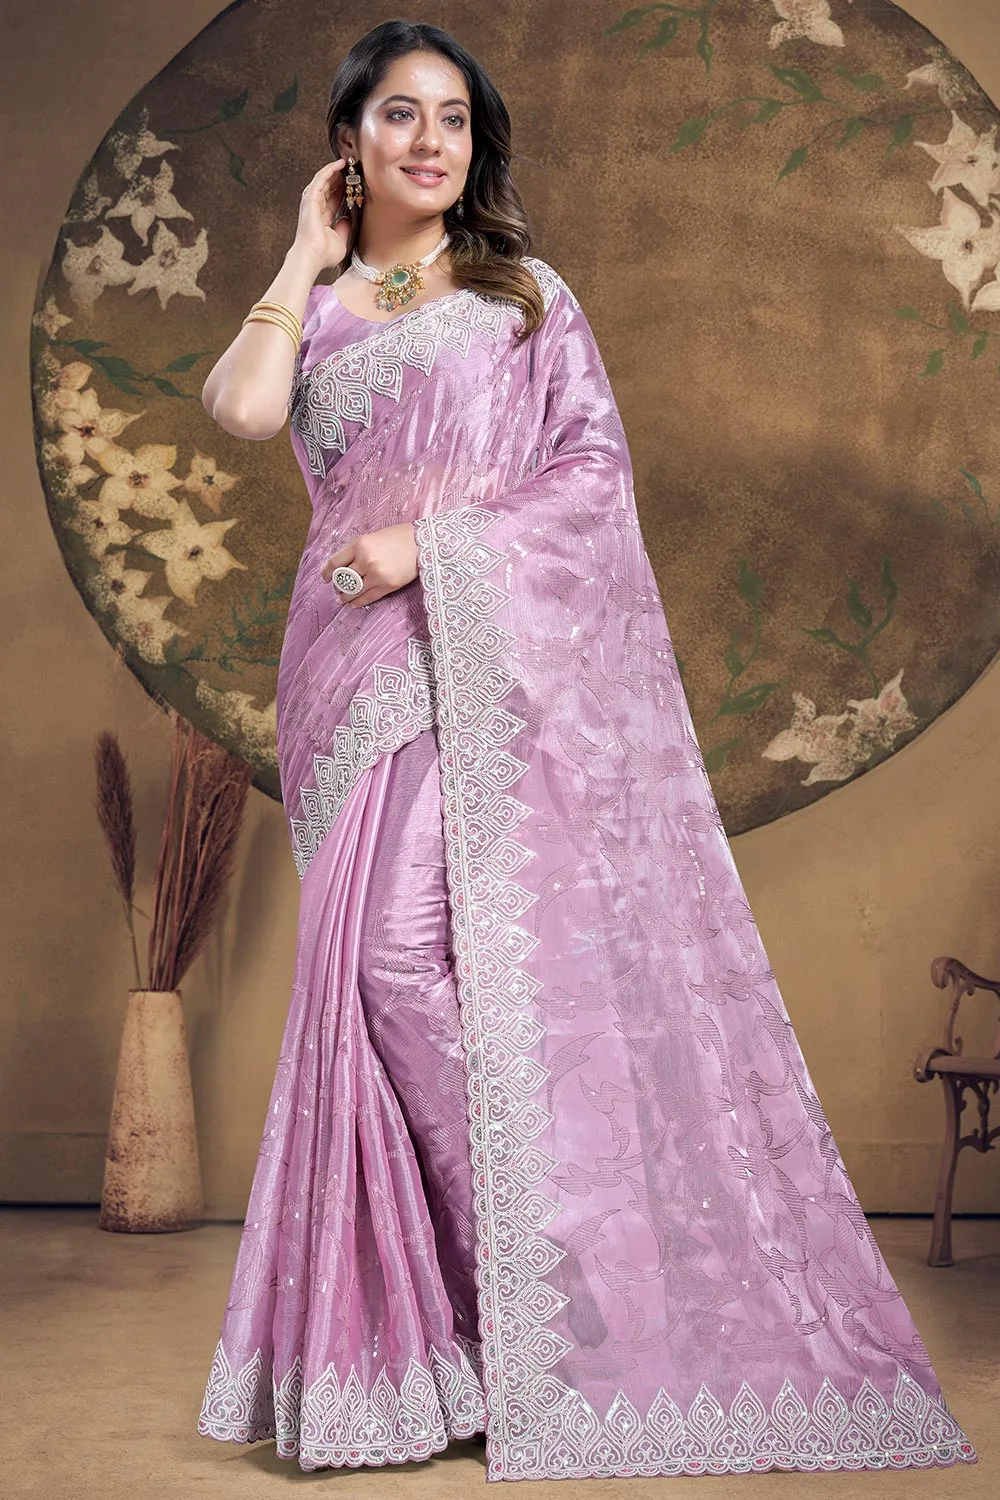 Lavender Silk Saree: Heavy Sequence Embroidered Work with Matching Blouse